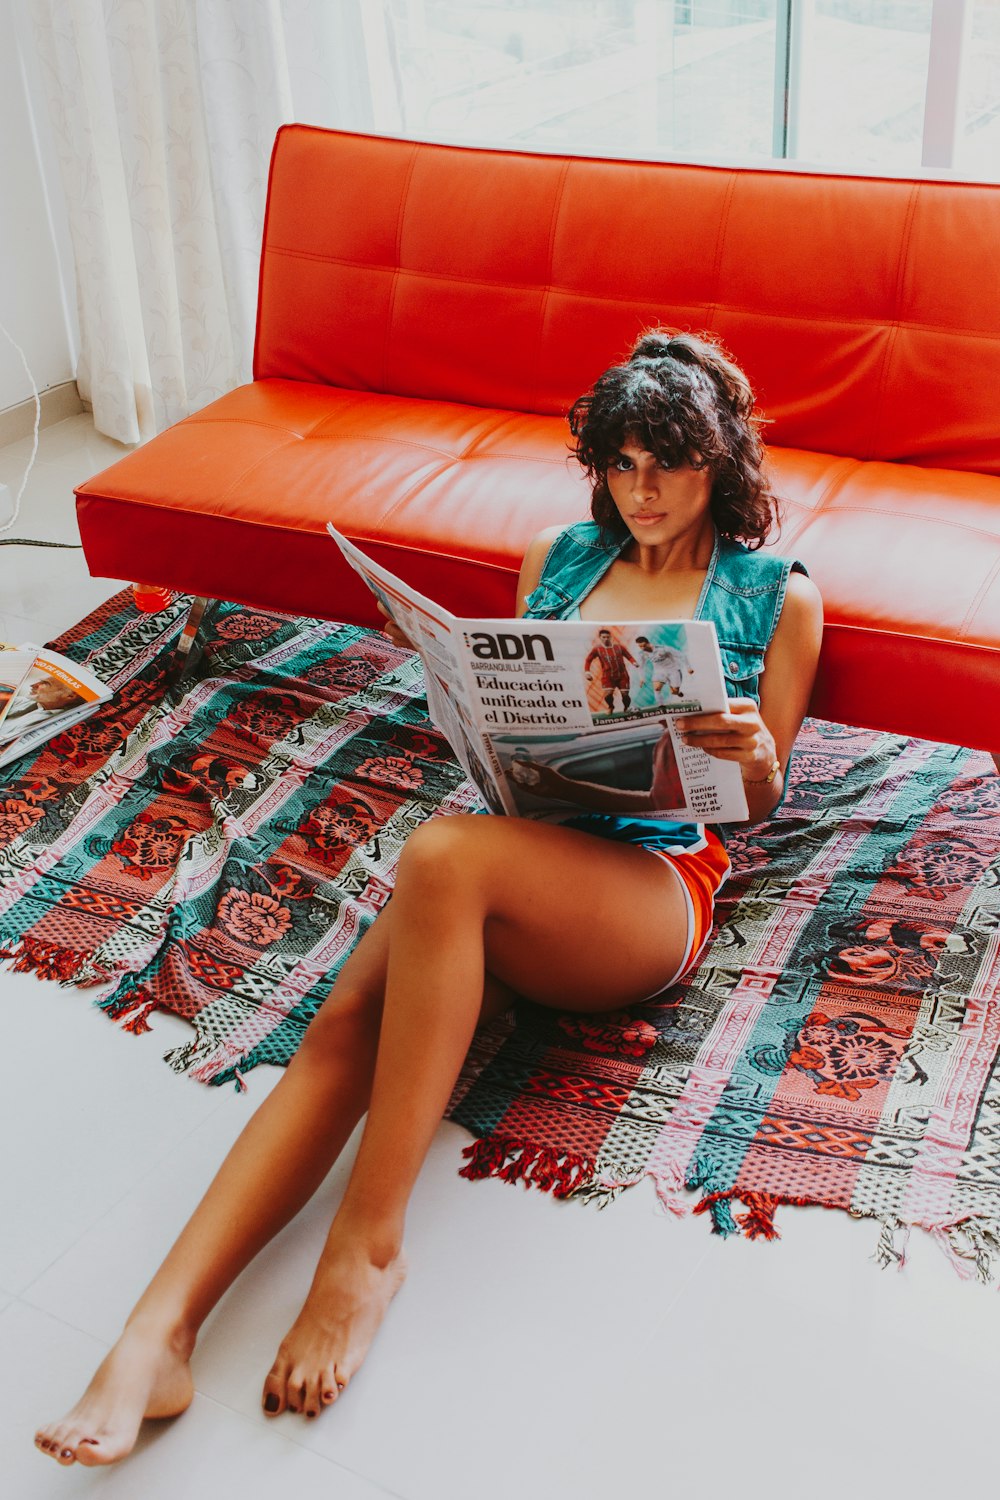 woman sitting on floor while reading newspaper during daytime